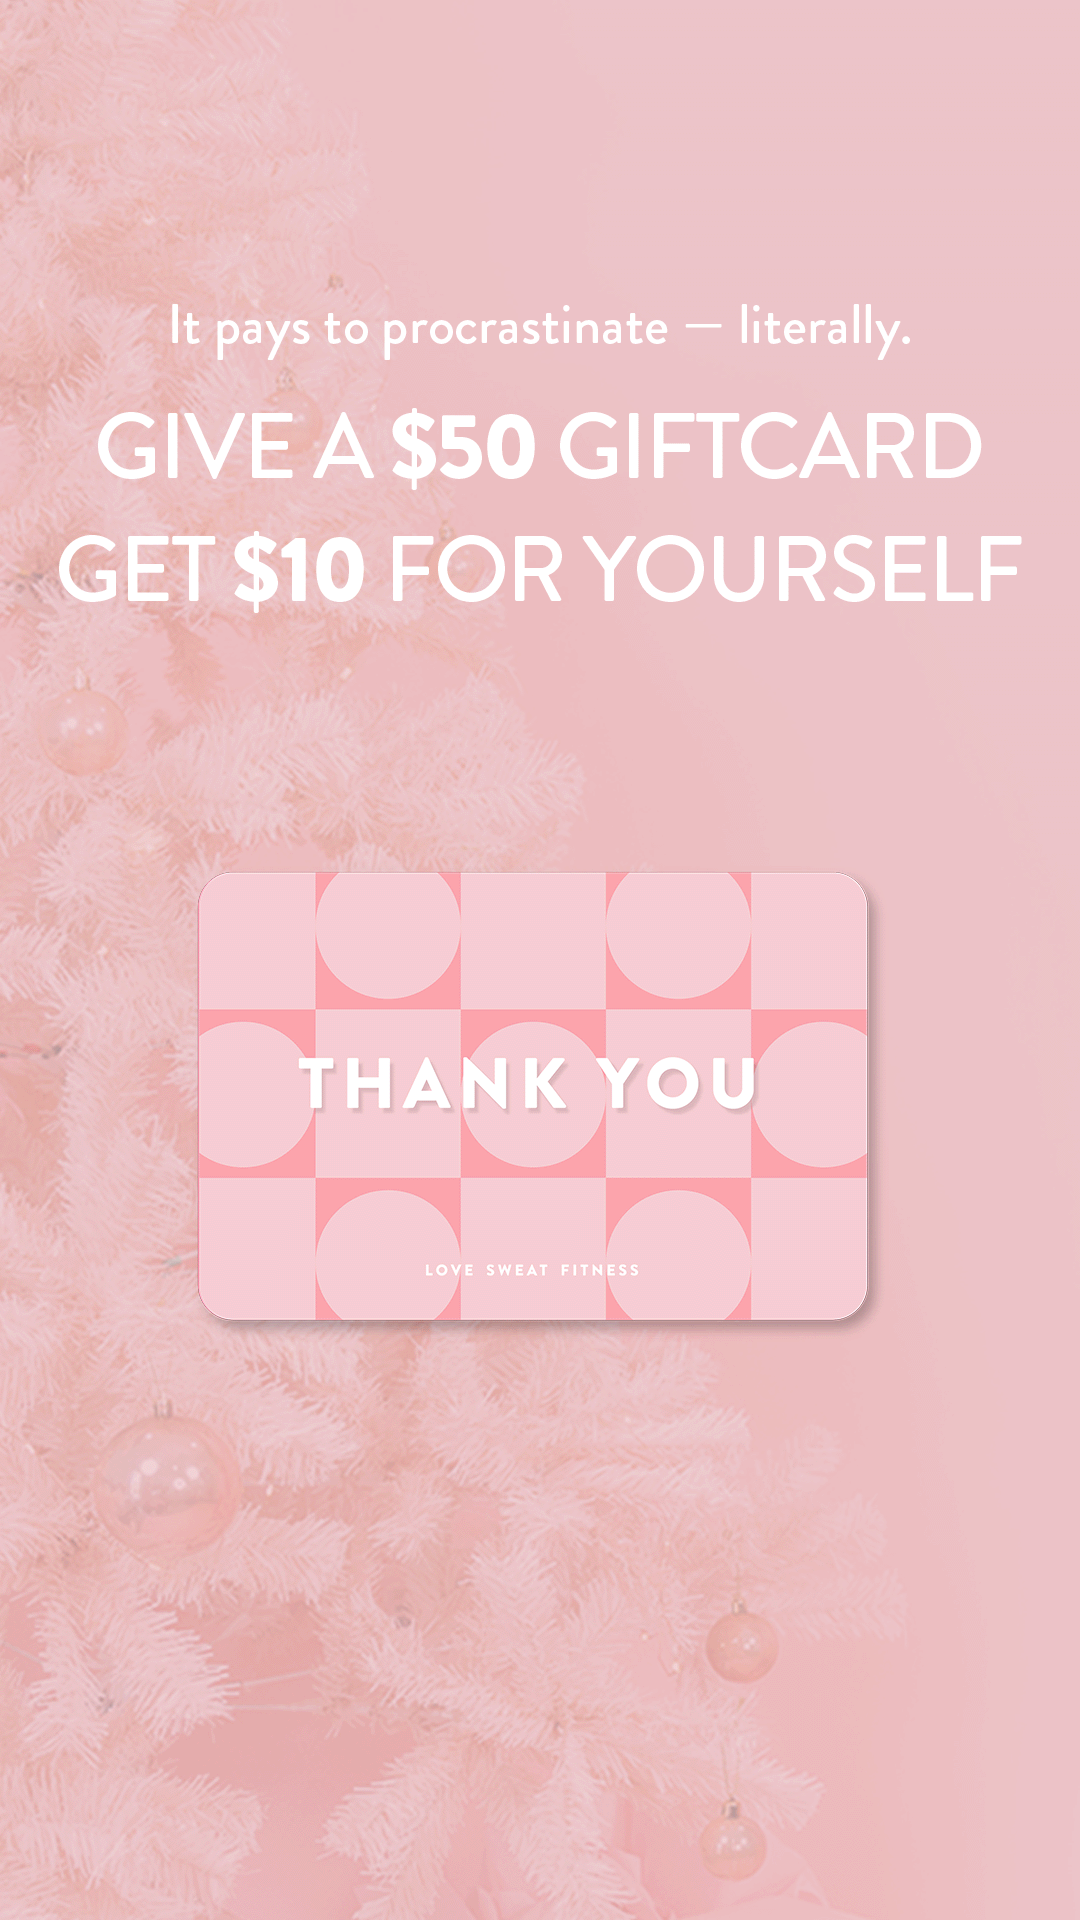 BUY A GIFT CARD, GET $10 GIFT CARD STORY copy.gif